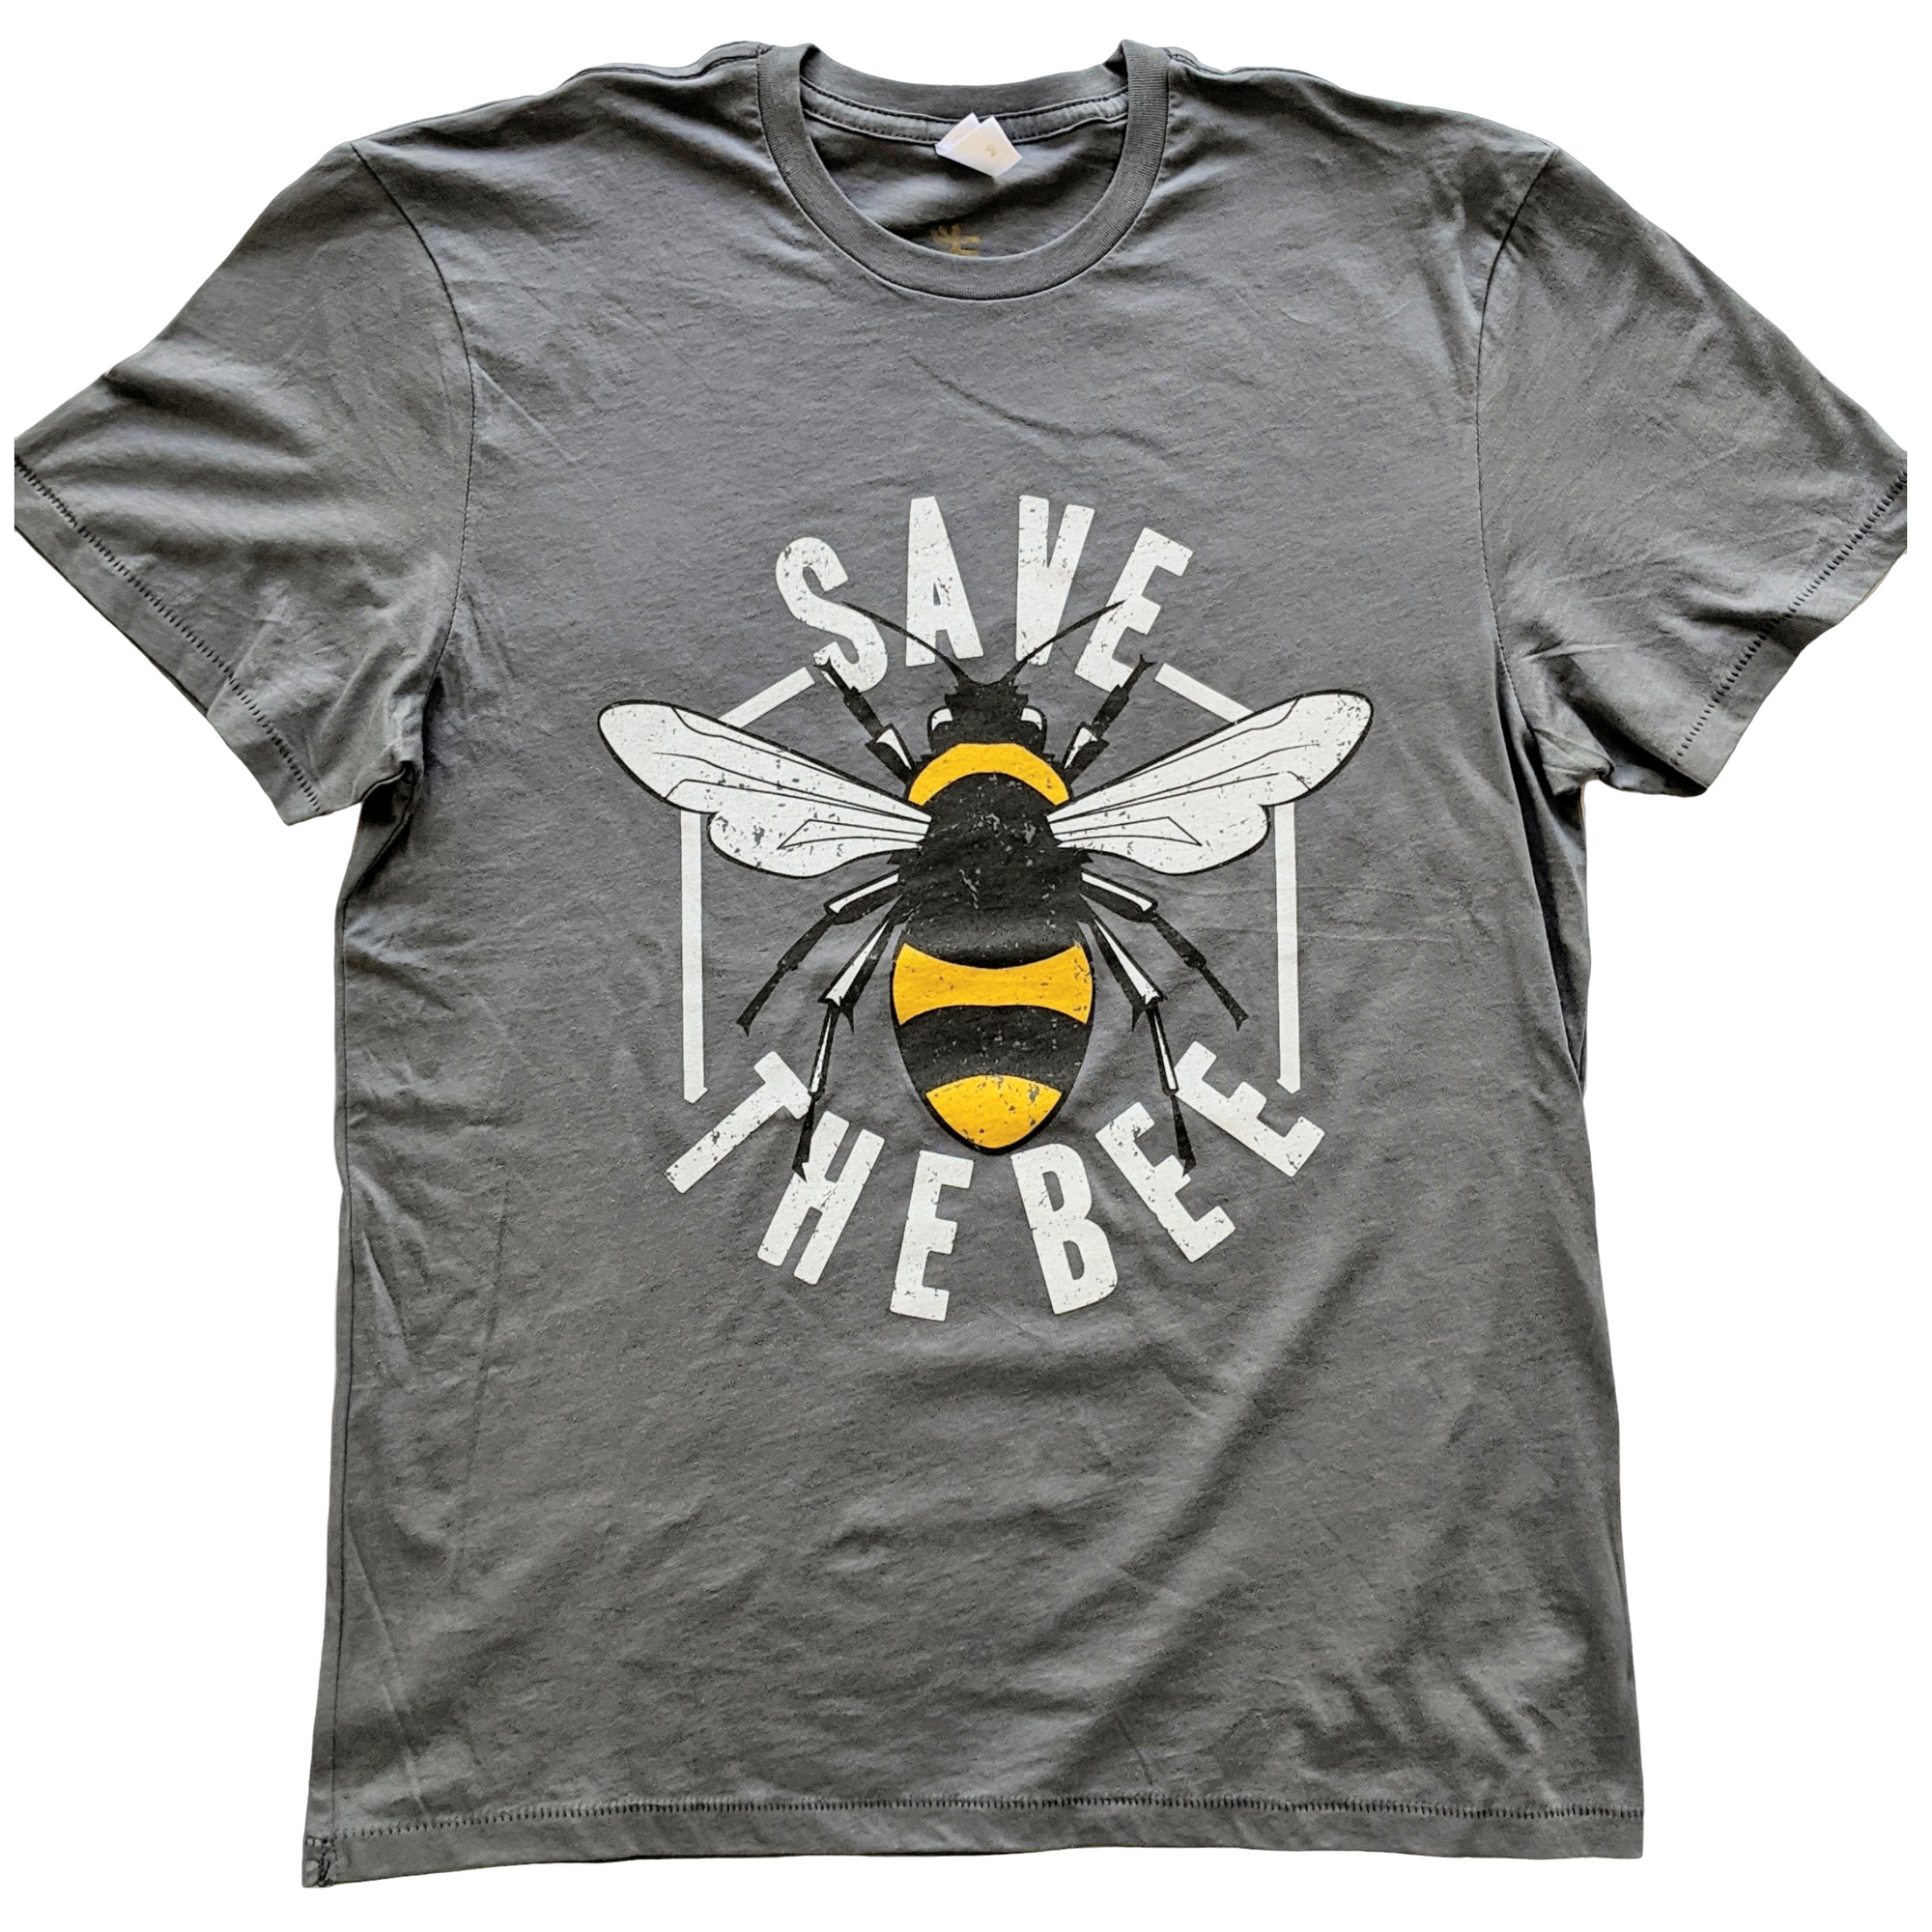 Save The Bee (Tee) - GreenHive Collective - ECO-FRIENDLY APPAREL